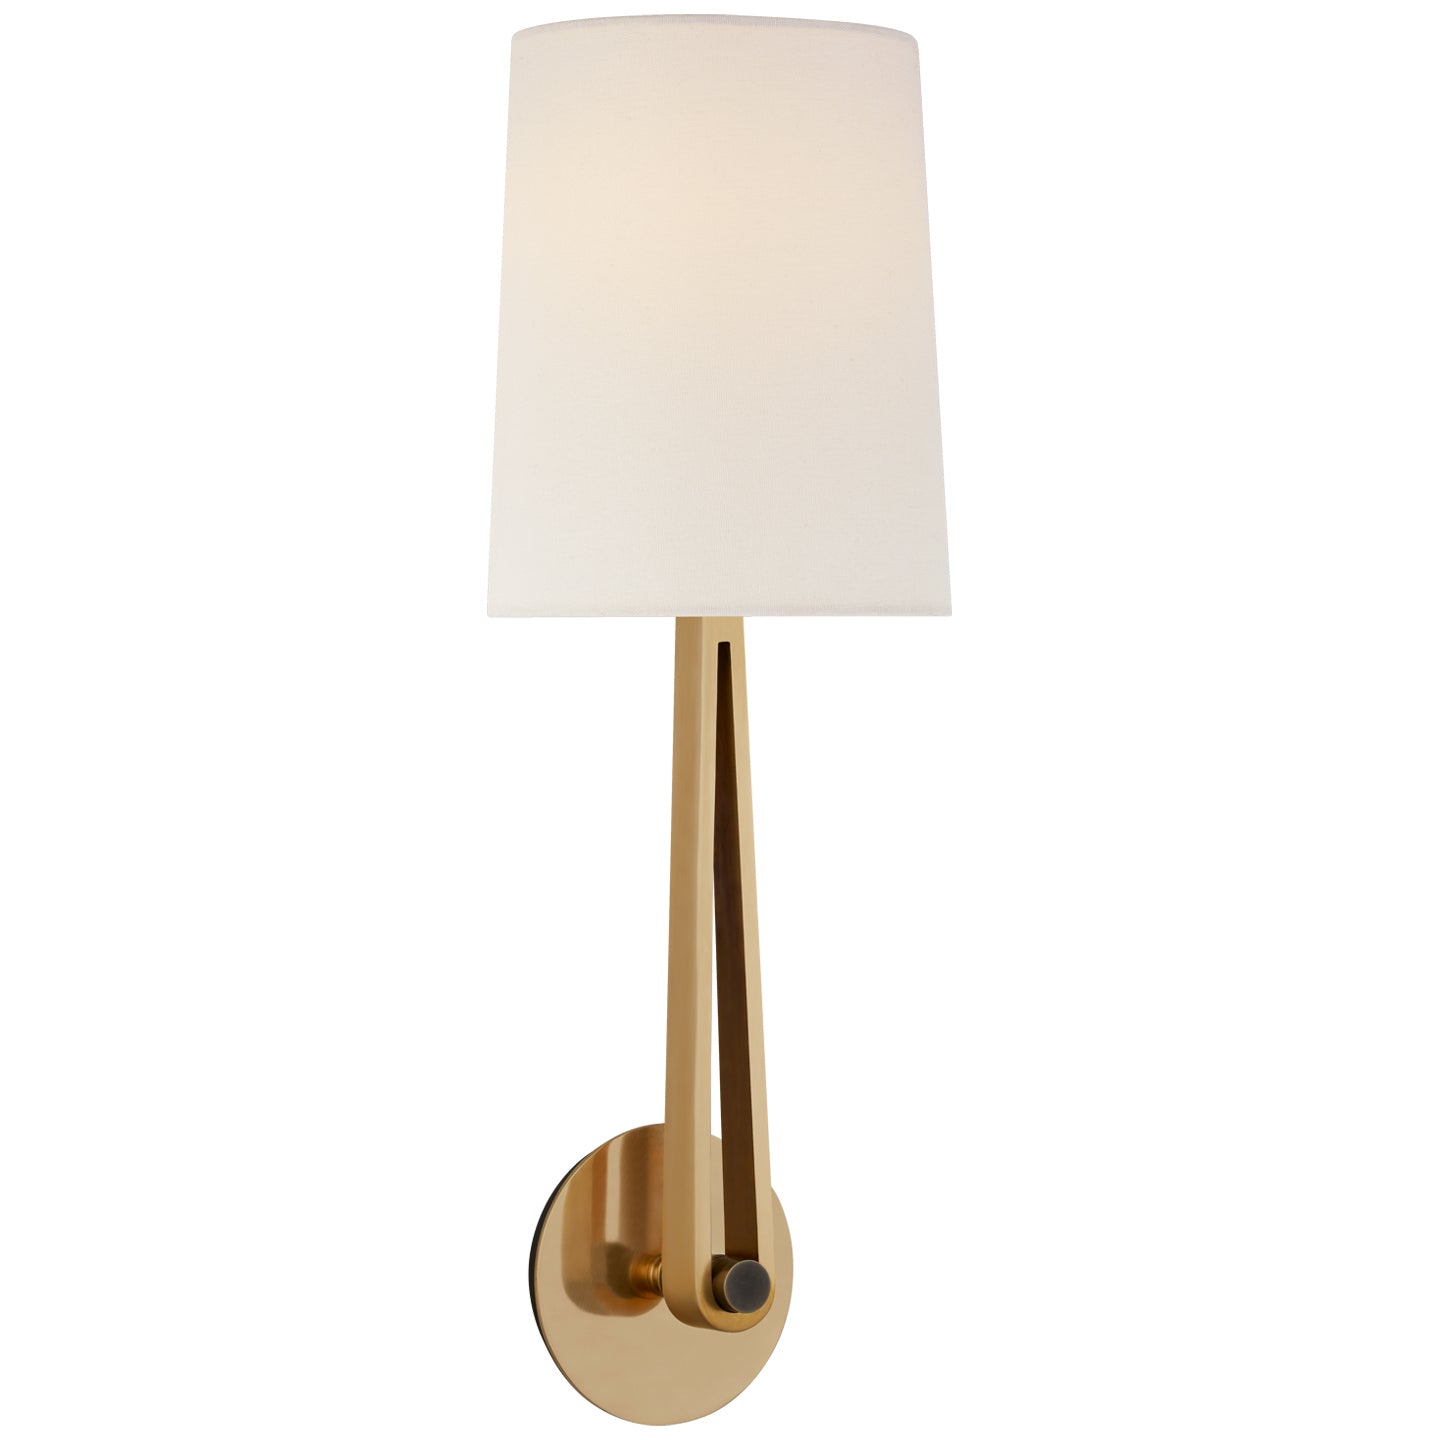 Visual Comfort Signature - TOB 2512HAB/BZ-L - Two Light Wall Sconce - Alpha - Hand-Rubbed Antique Brass and Bronze